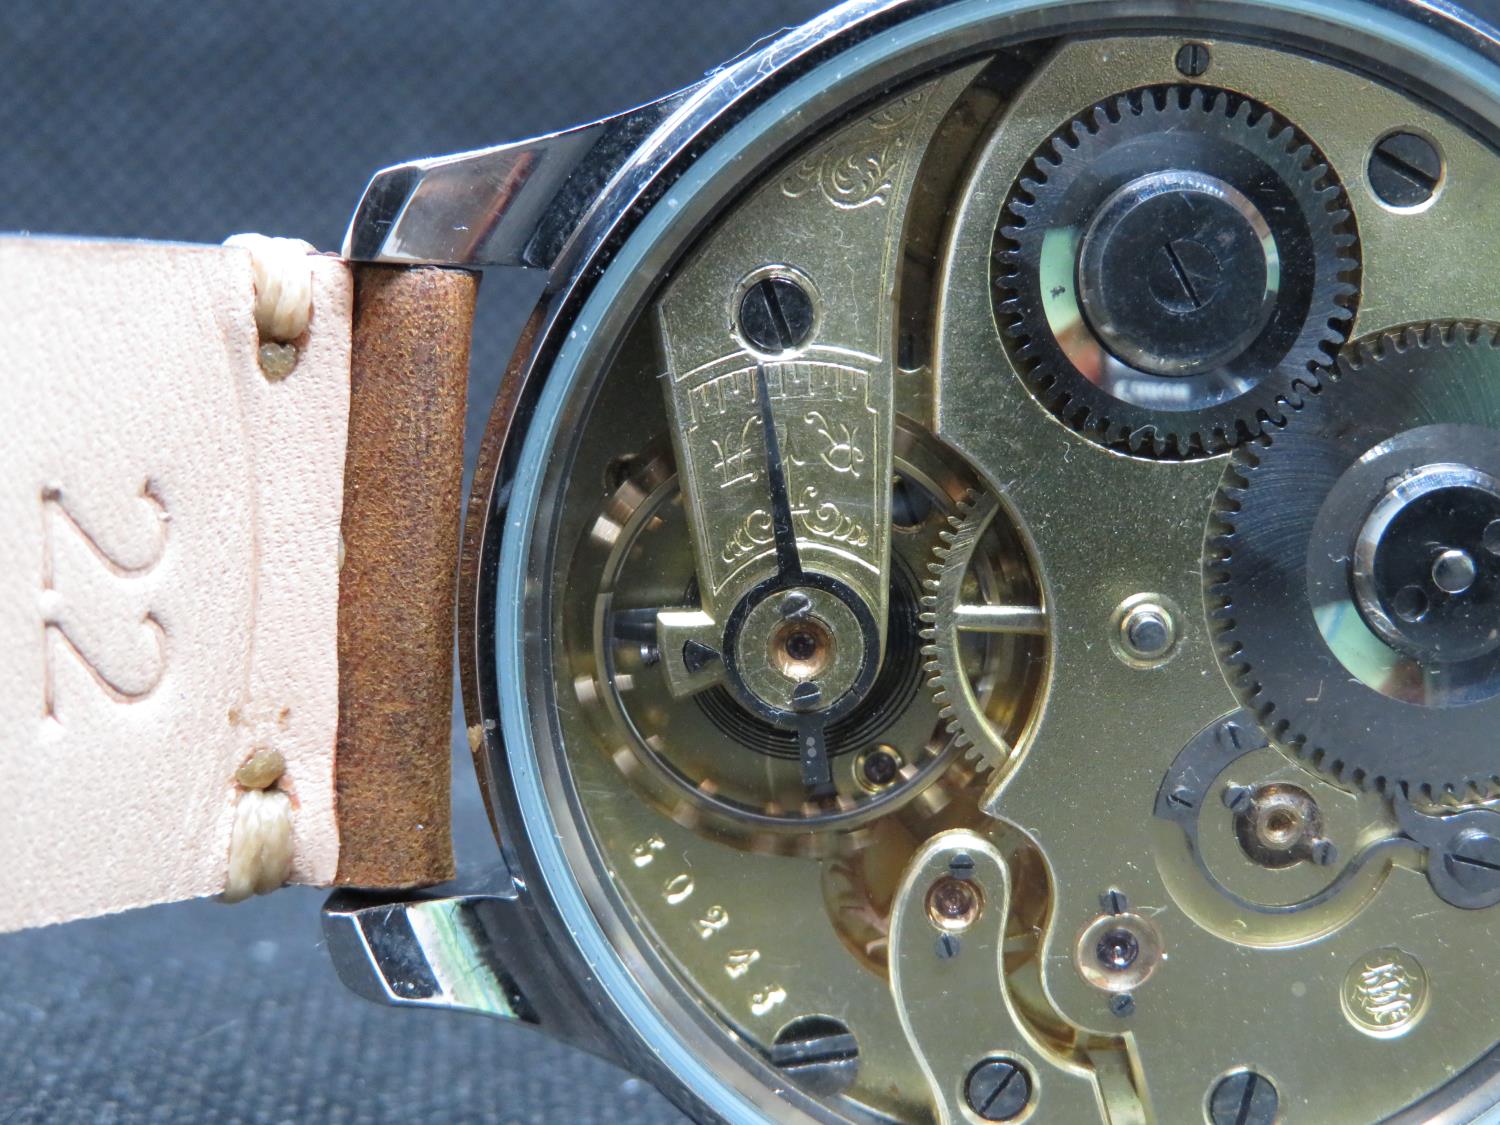 IWC Military wristwatch dial refurbished and replaced with military design - original movement - Bild 7 aus 9